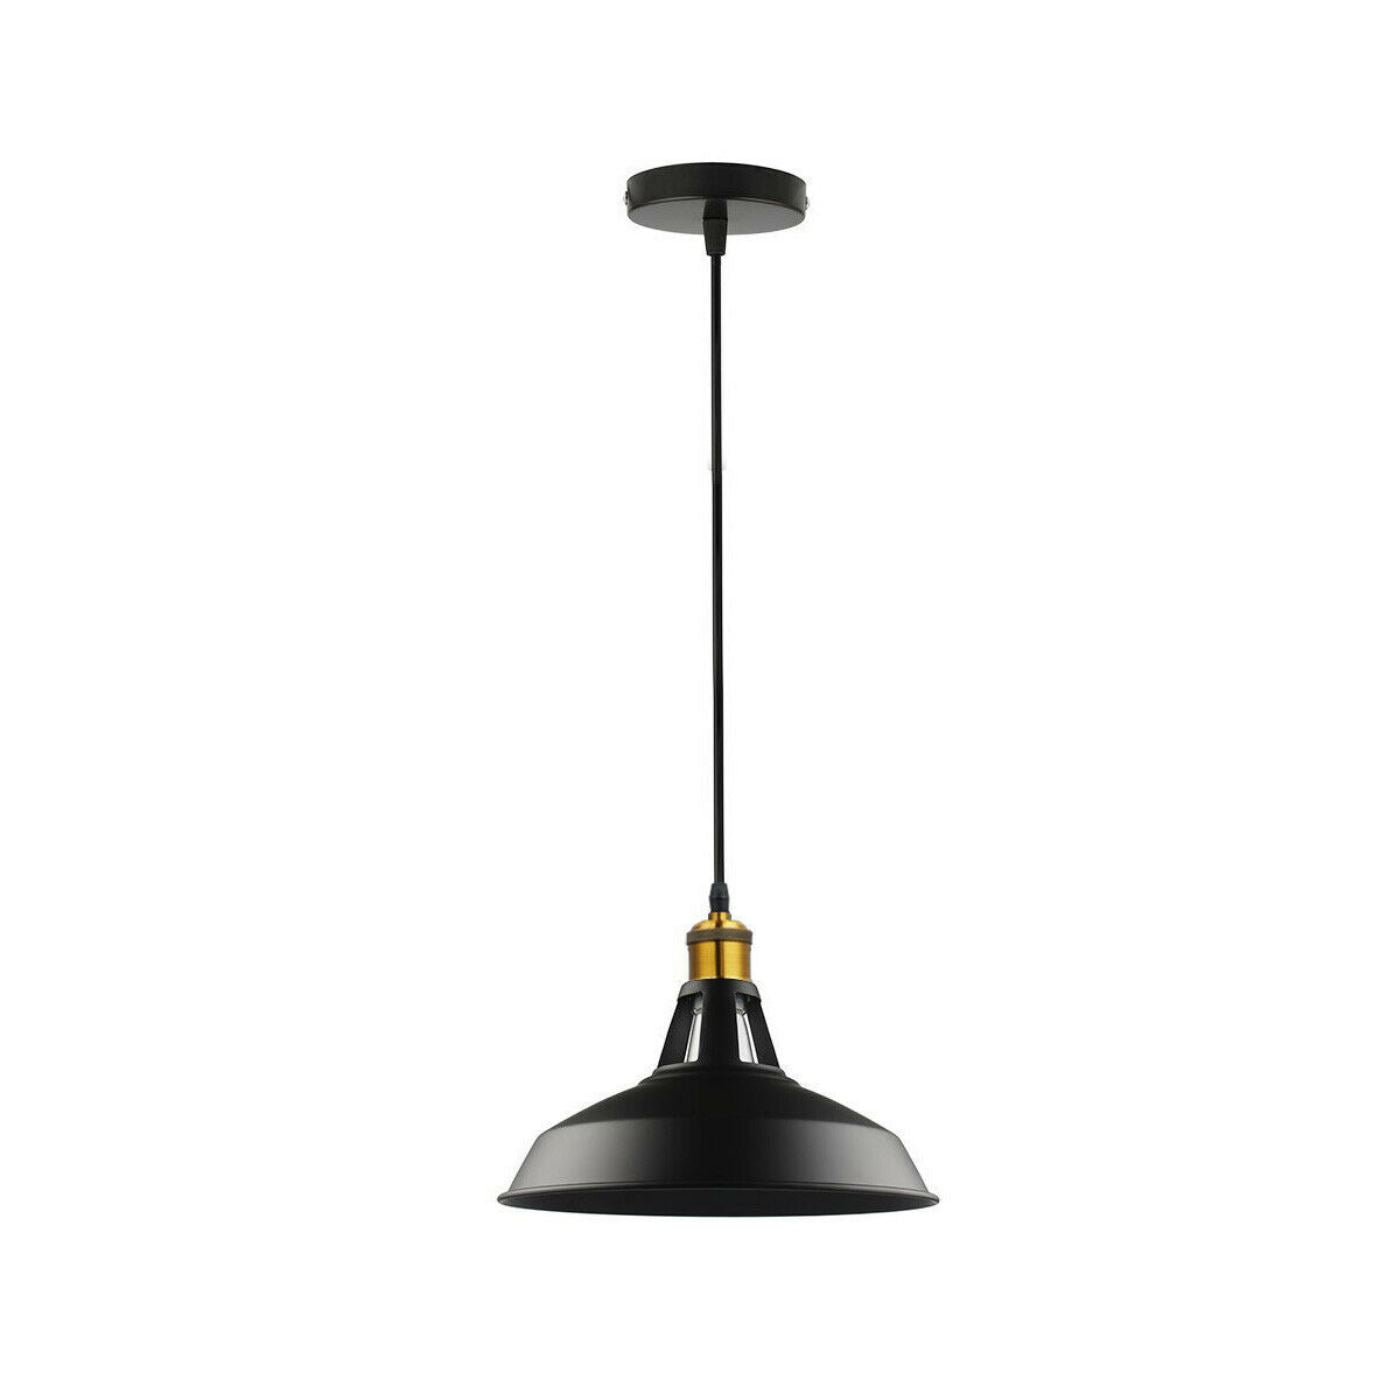 Modern Black Colour Lampshade with FREE Bulb Industrial Retro Style Metal Ceiling Pendant Lightshade~2554 - LEDSone UK Ltd